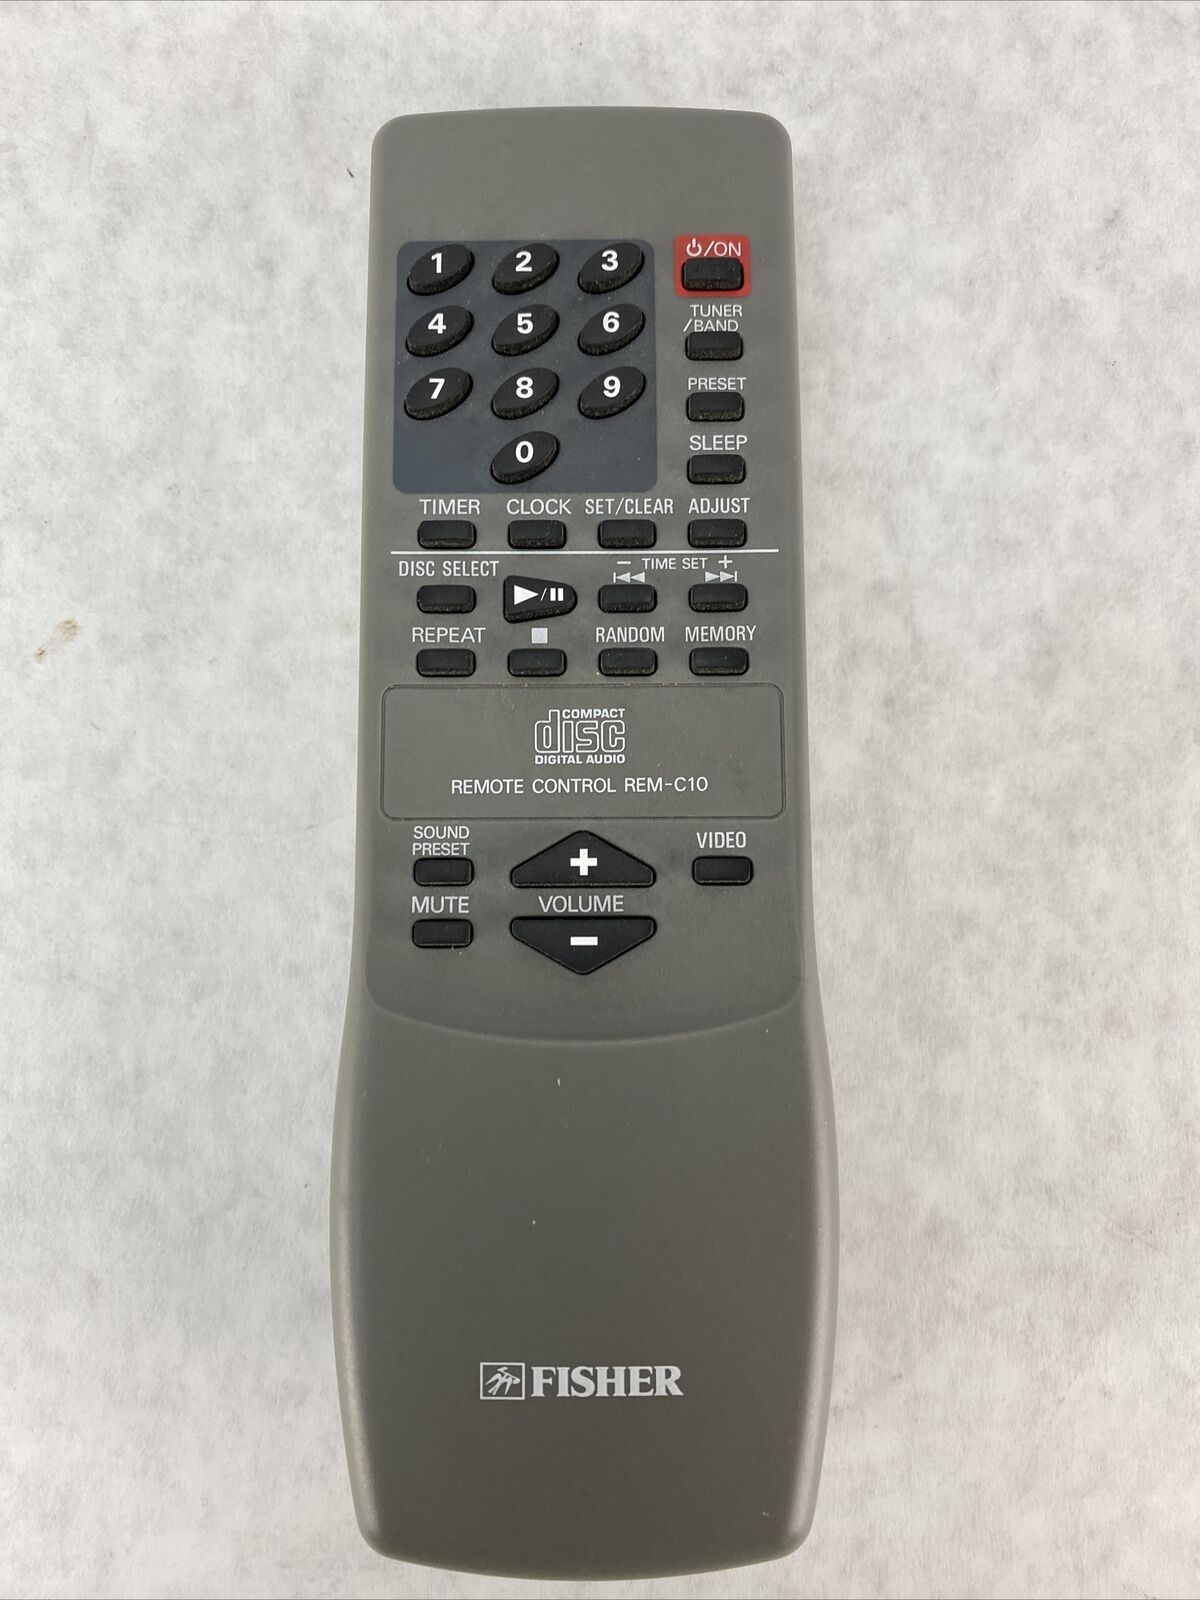 Fisher REM-C10 Remote Control for Fisher TAD-S450 Mini Stereo